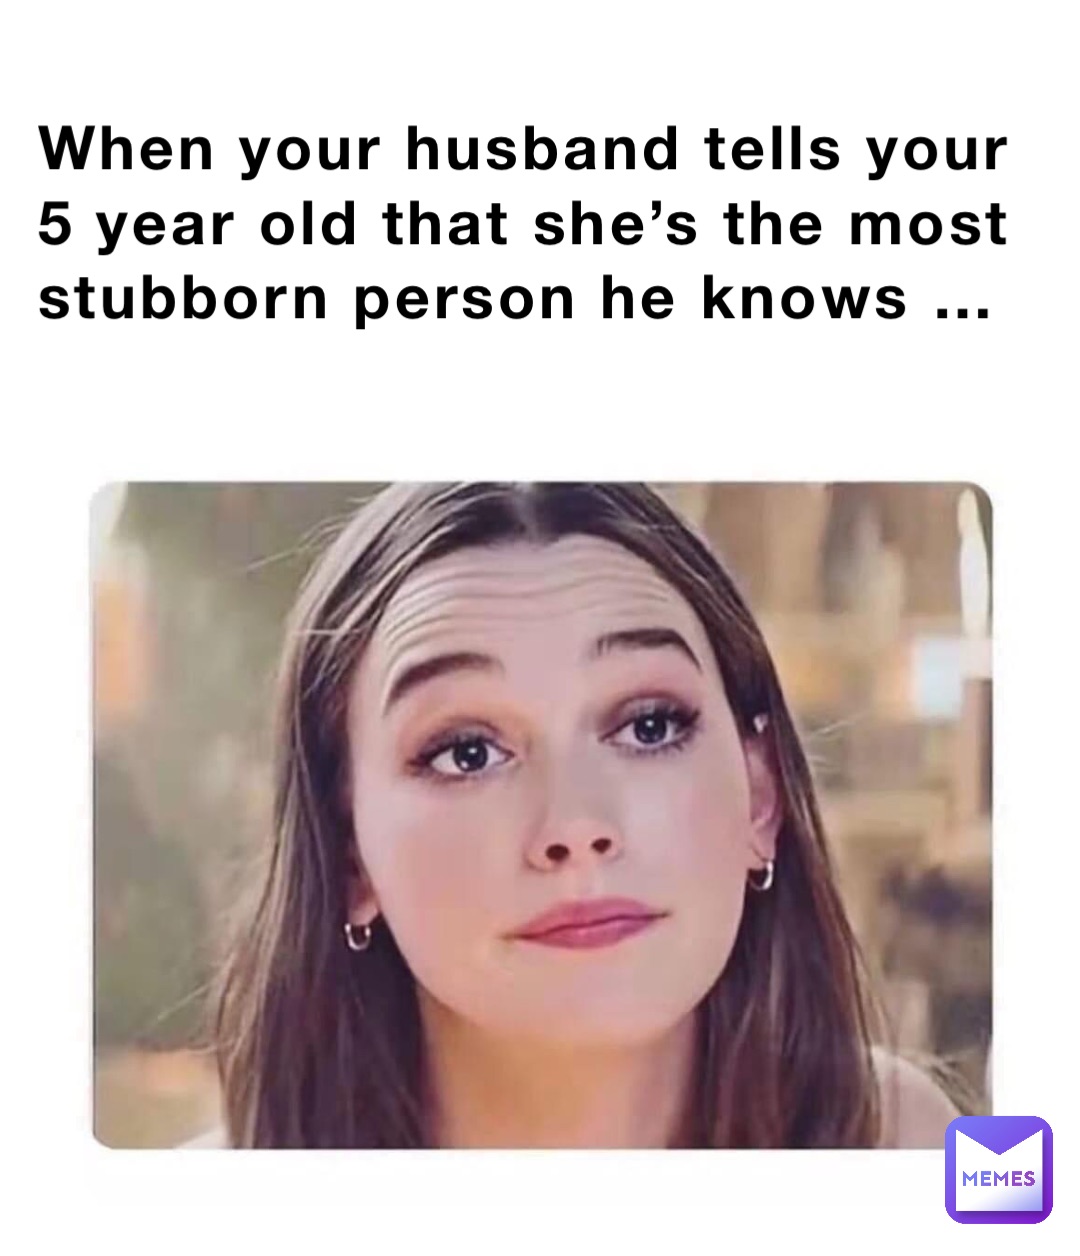 When your husband tells your 5 year old that she’s the most stubborn person he knows …